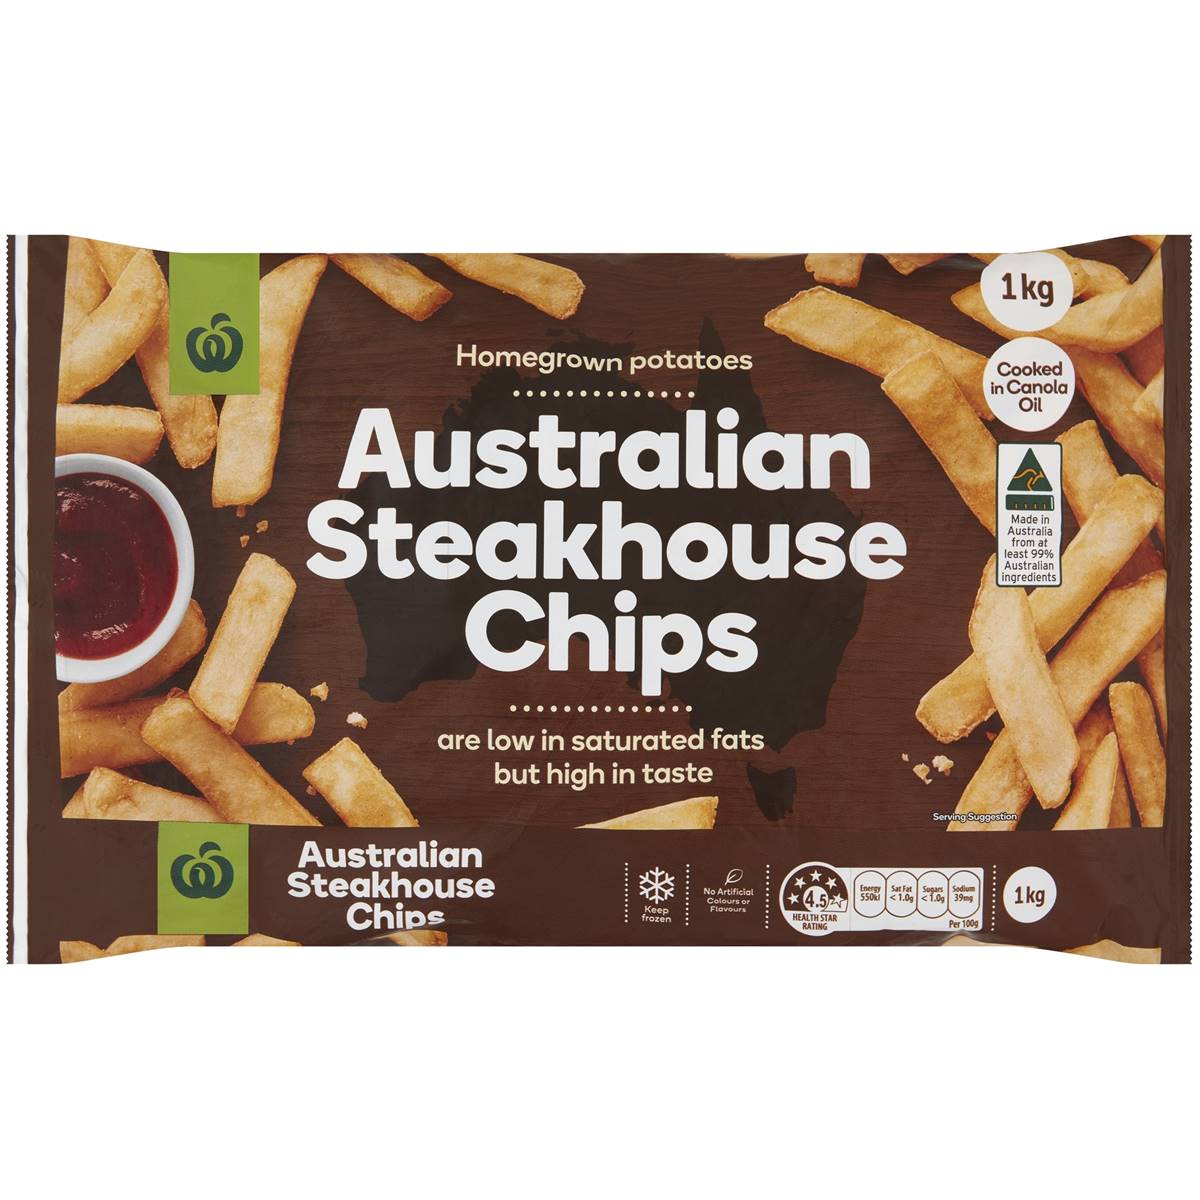 Calories in Woolworths Chunky Steakhouse Chips